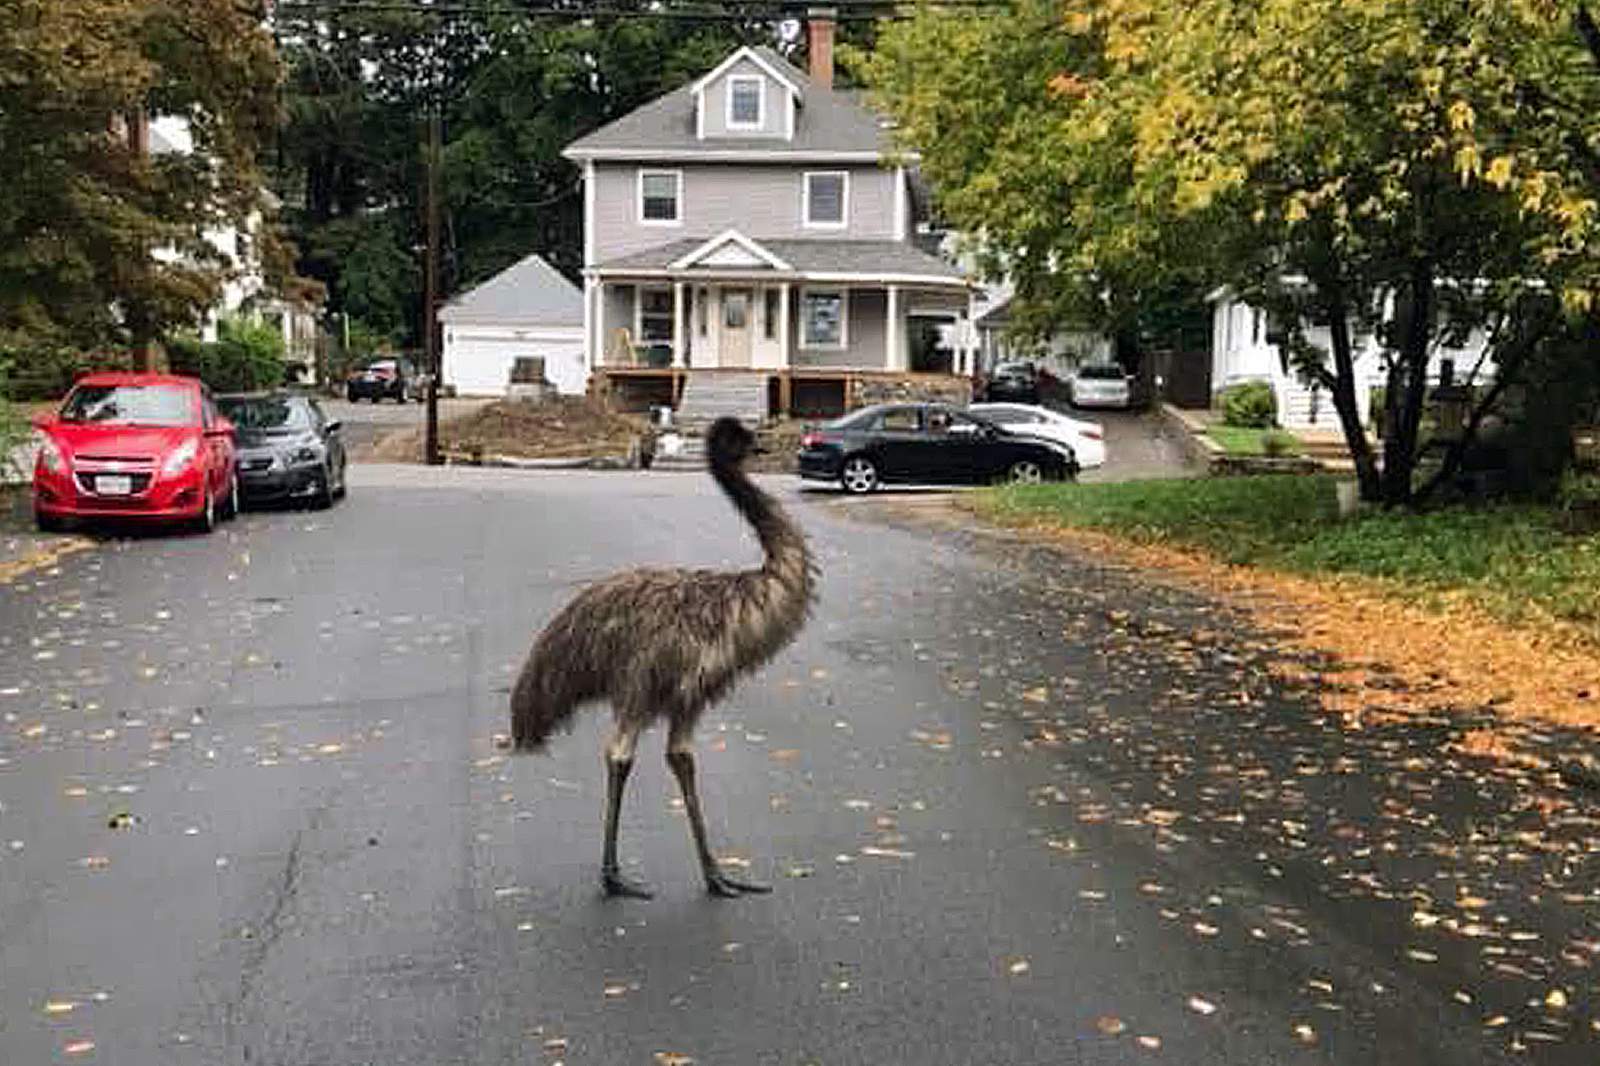 Authorities use pear to entice, capture escaped emu